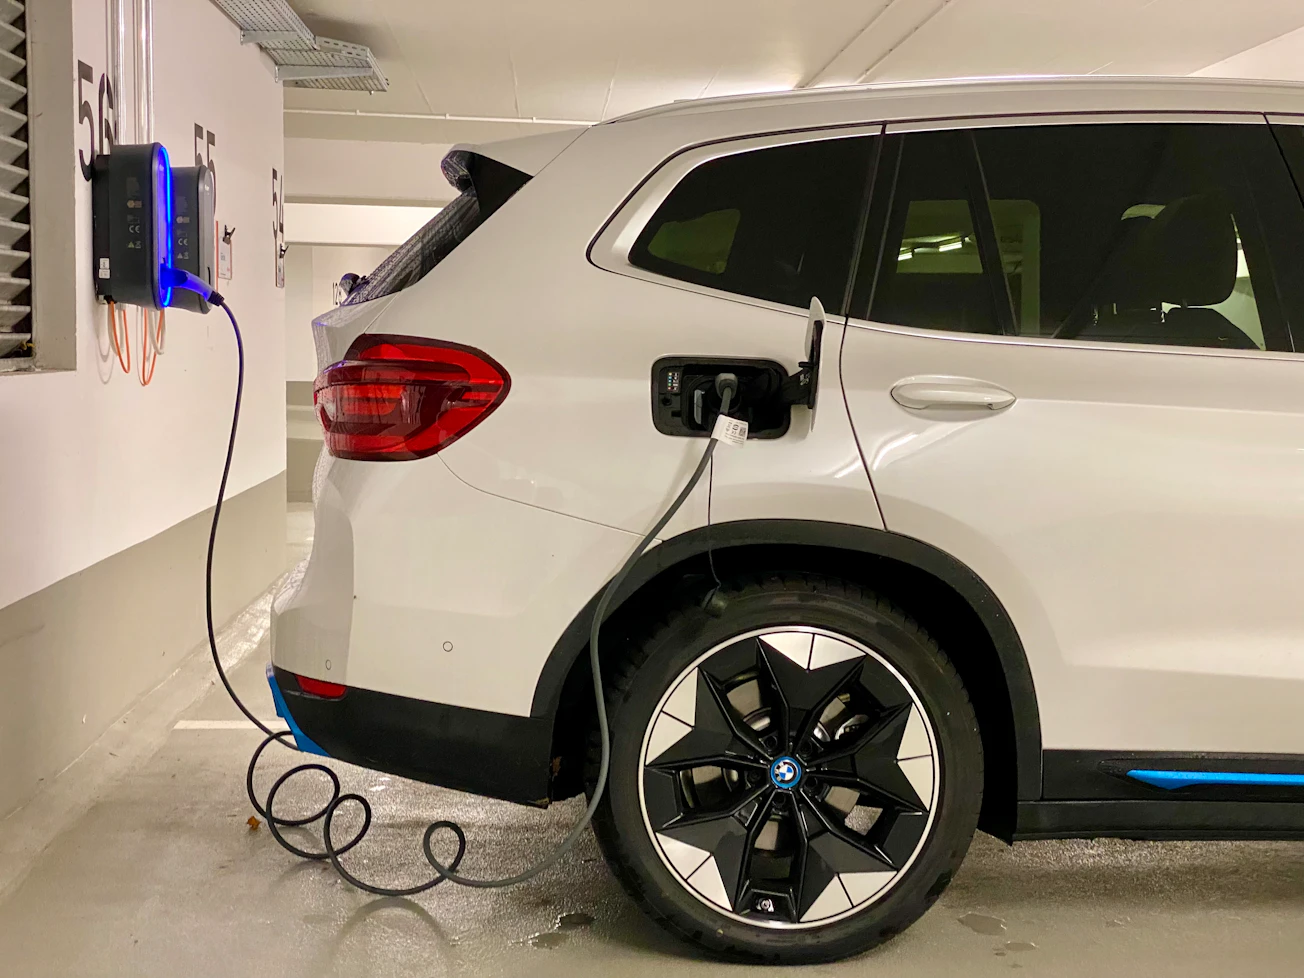 Chicago EV Charging Fiasco Appears To Pierce Proponents’ Claims About Performance In Bitter Cold